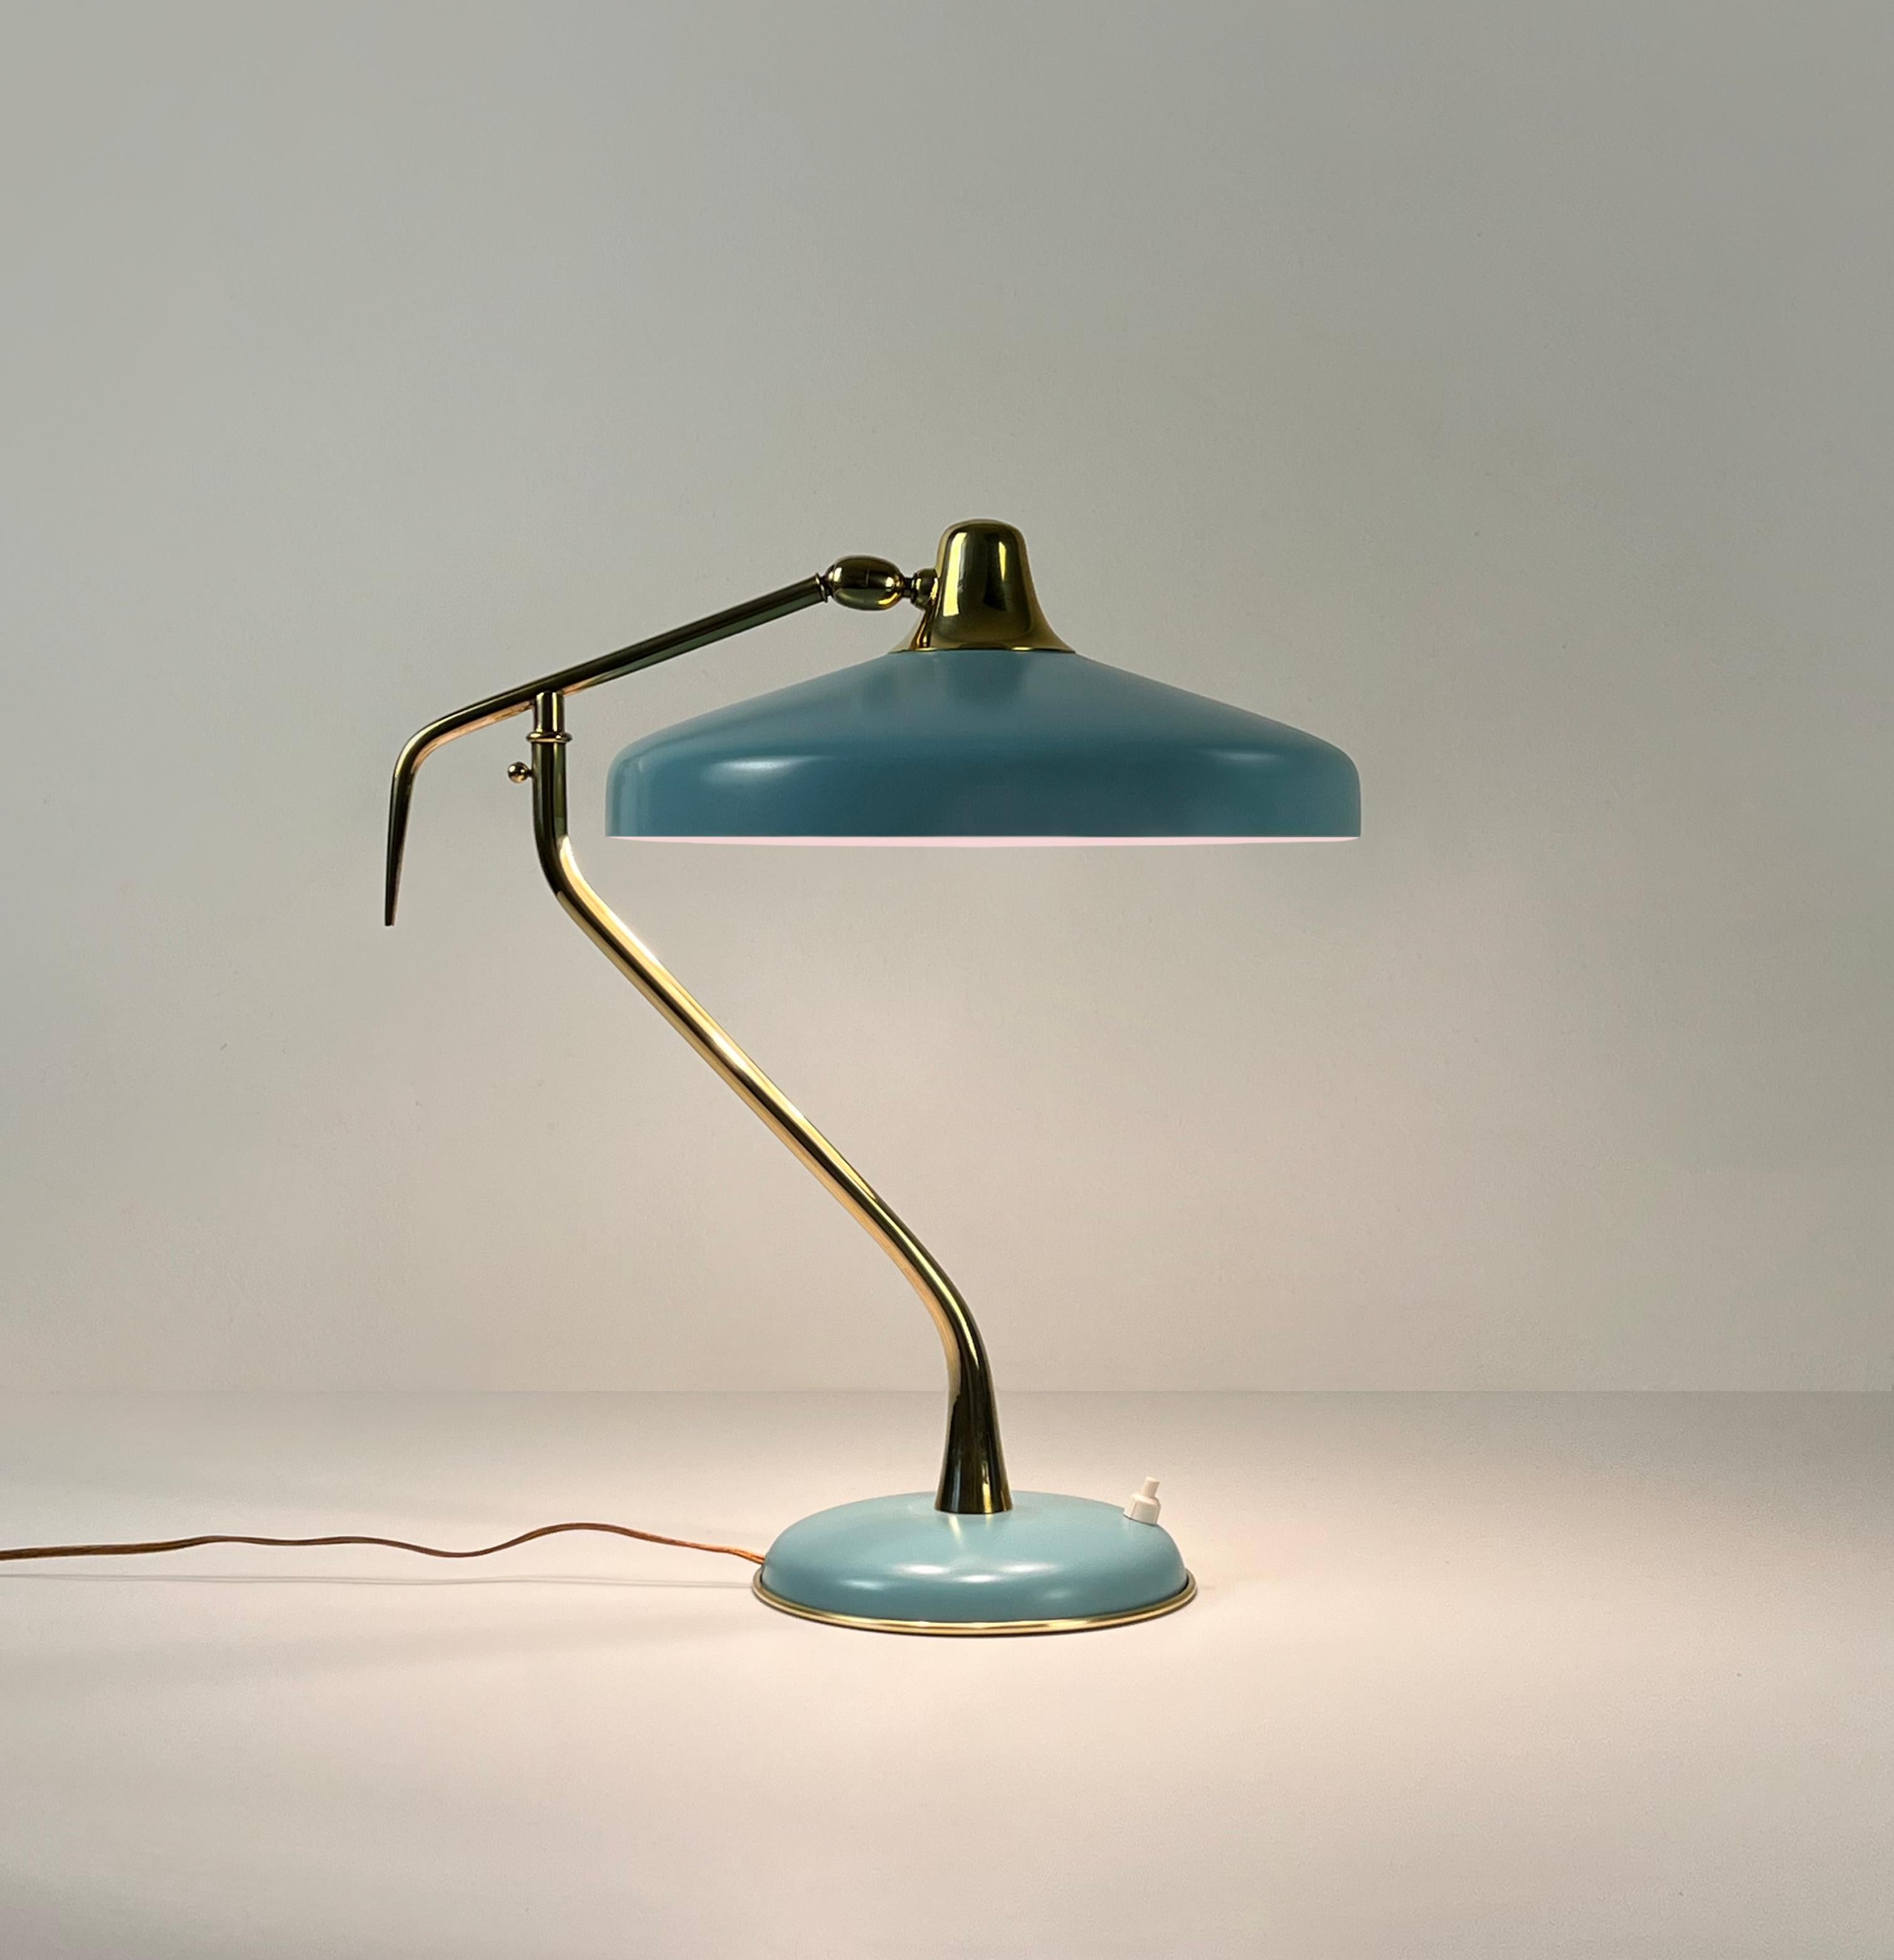 Model 331 table lamp designed by Oscar Torlasco for Lumi Milano, Italy 1950s

Oscar Torlasco's model 331 desk lamp, crafted by Milanese lighting company LUMI, showcases a timeless Italian design using premium materials like brass and aluminum.